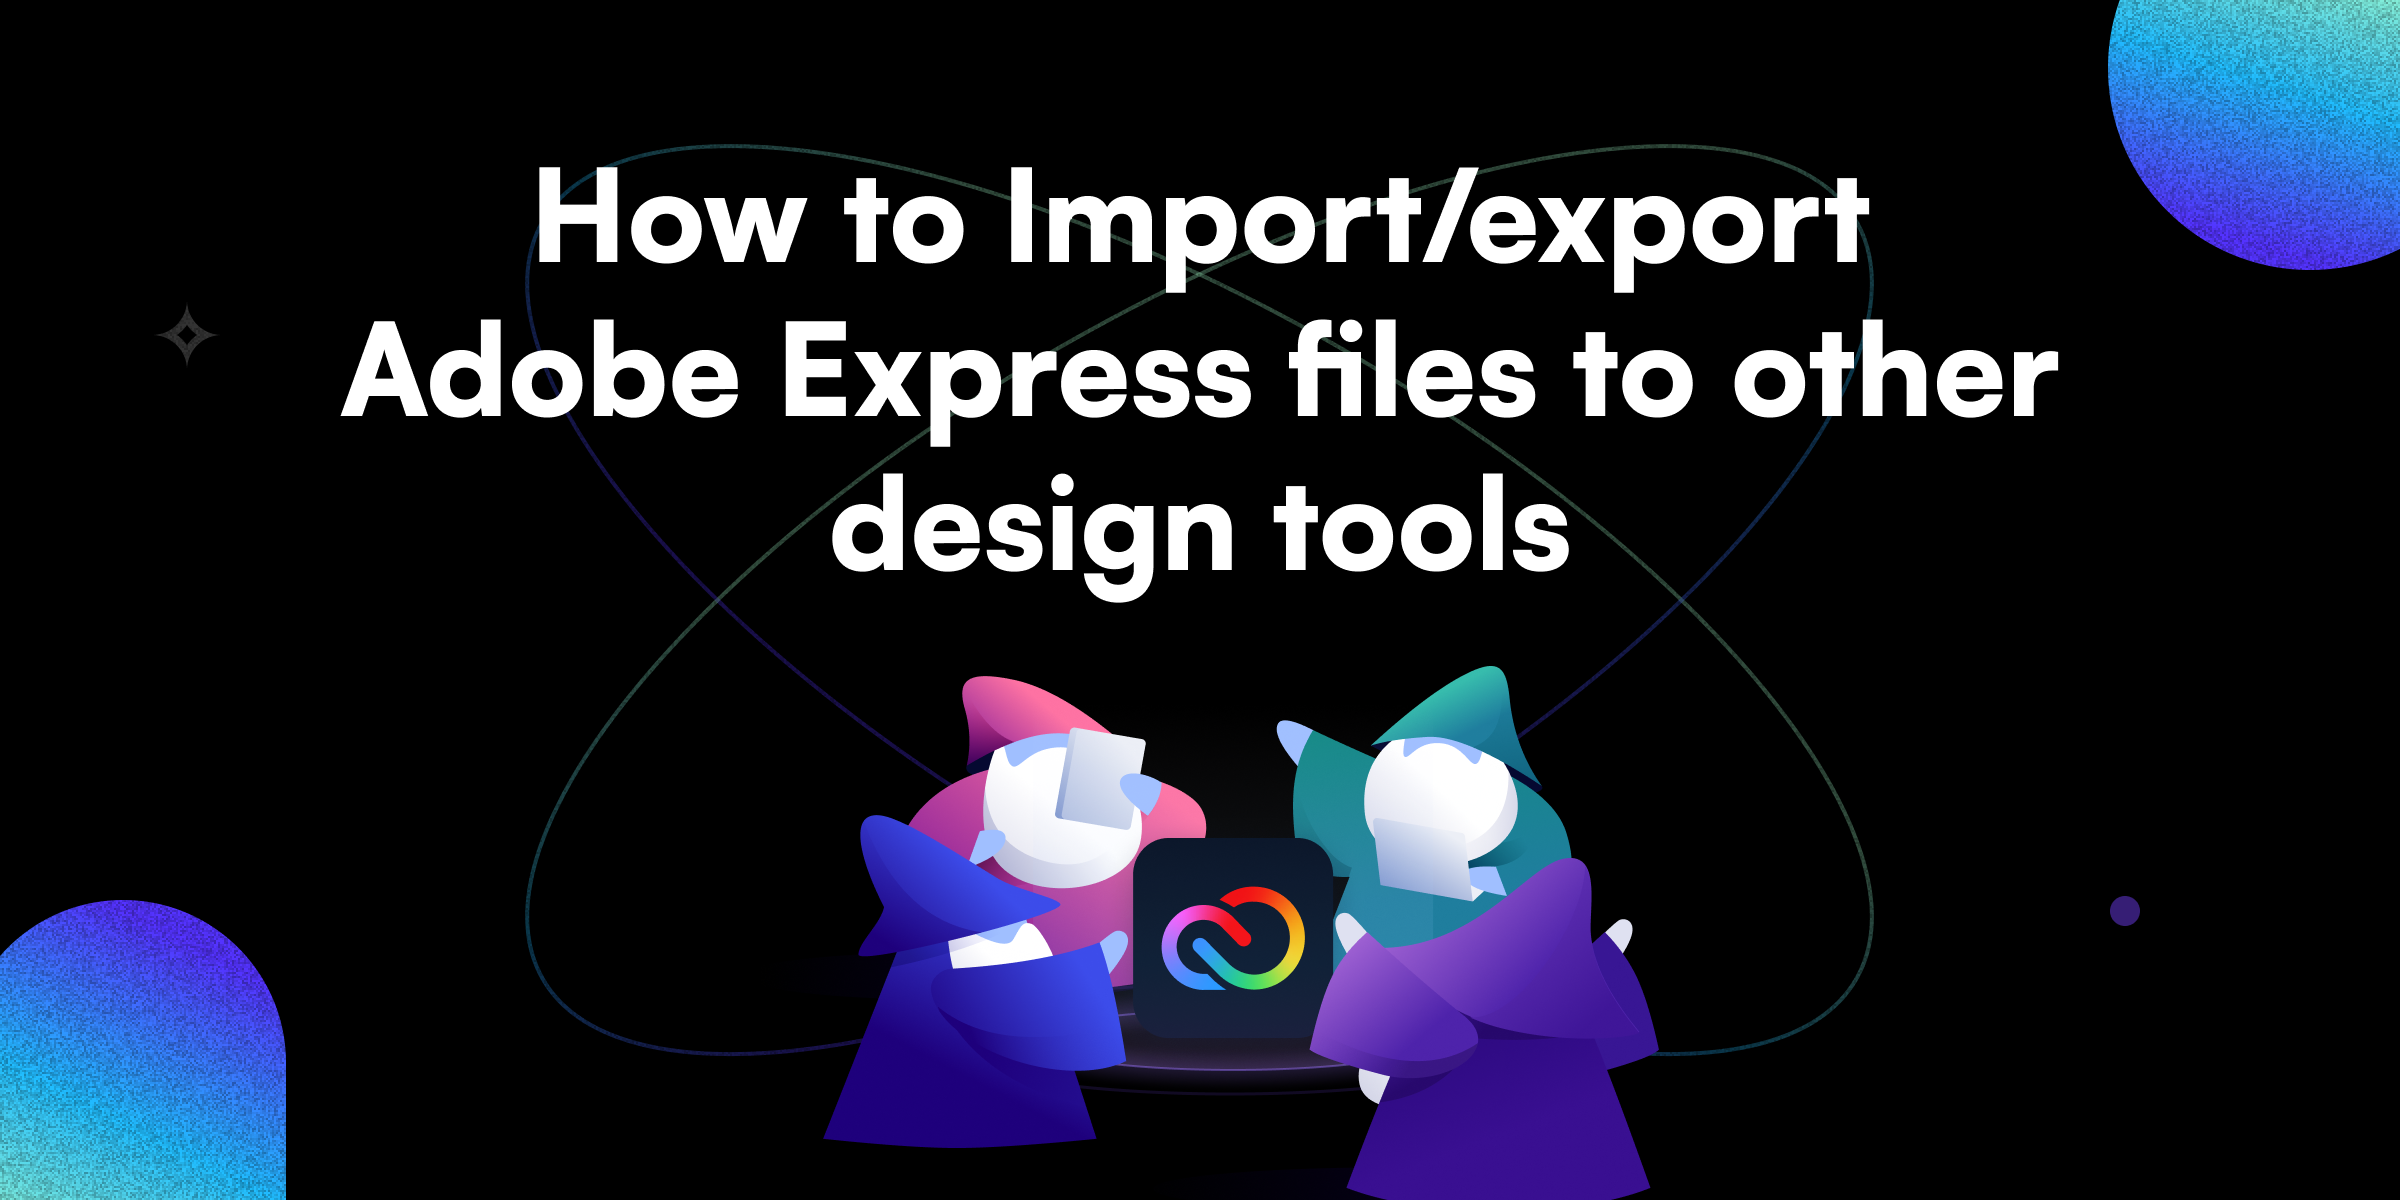 Exploring Adobe Express import and export options